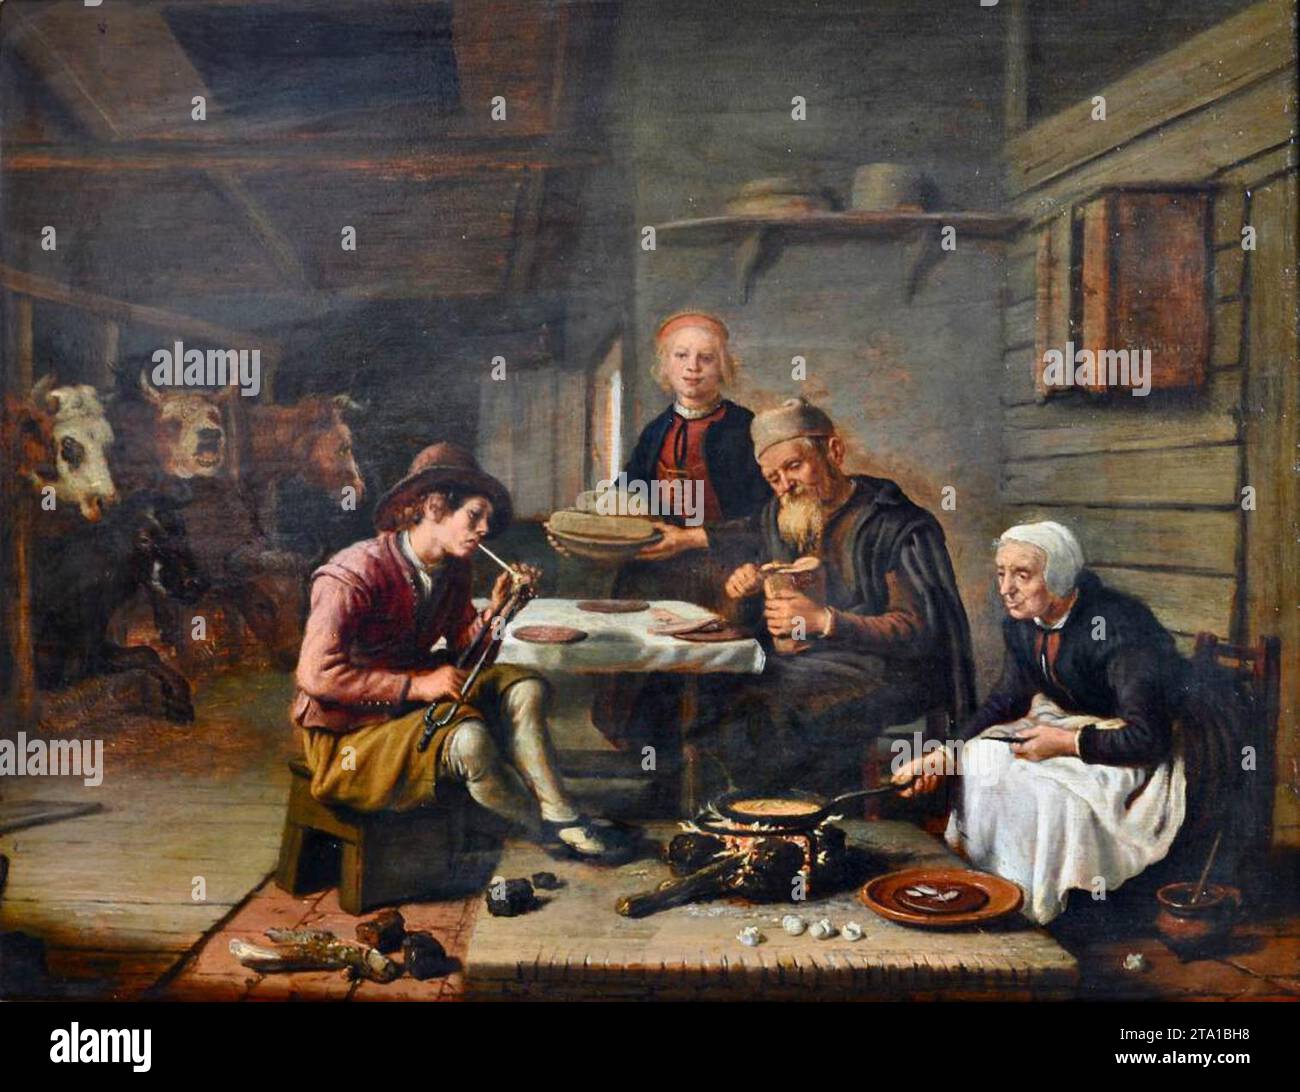 Peasants' Meal at the Stables - by Jan Victors Stock Photo